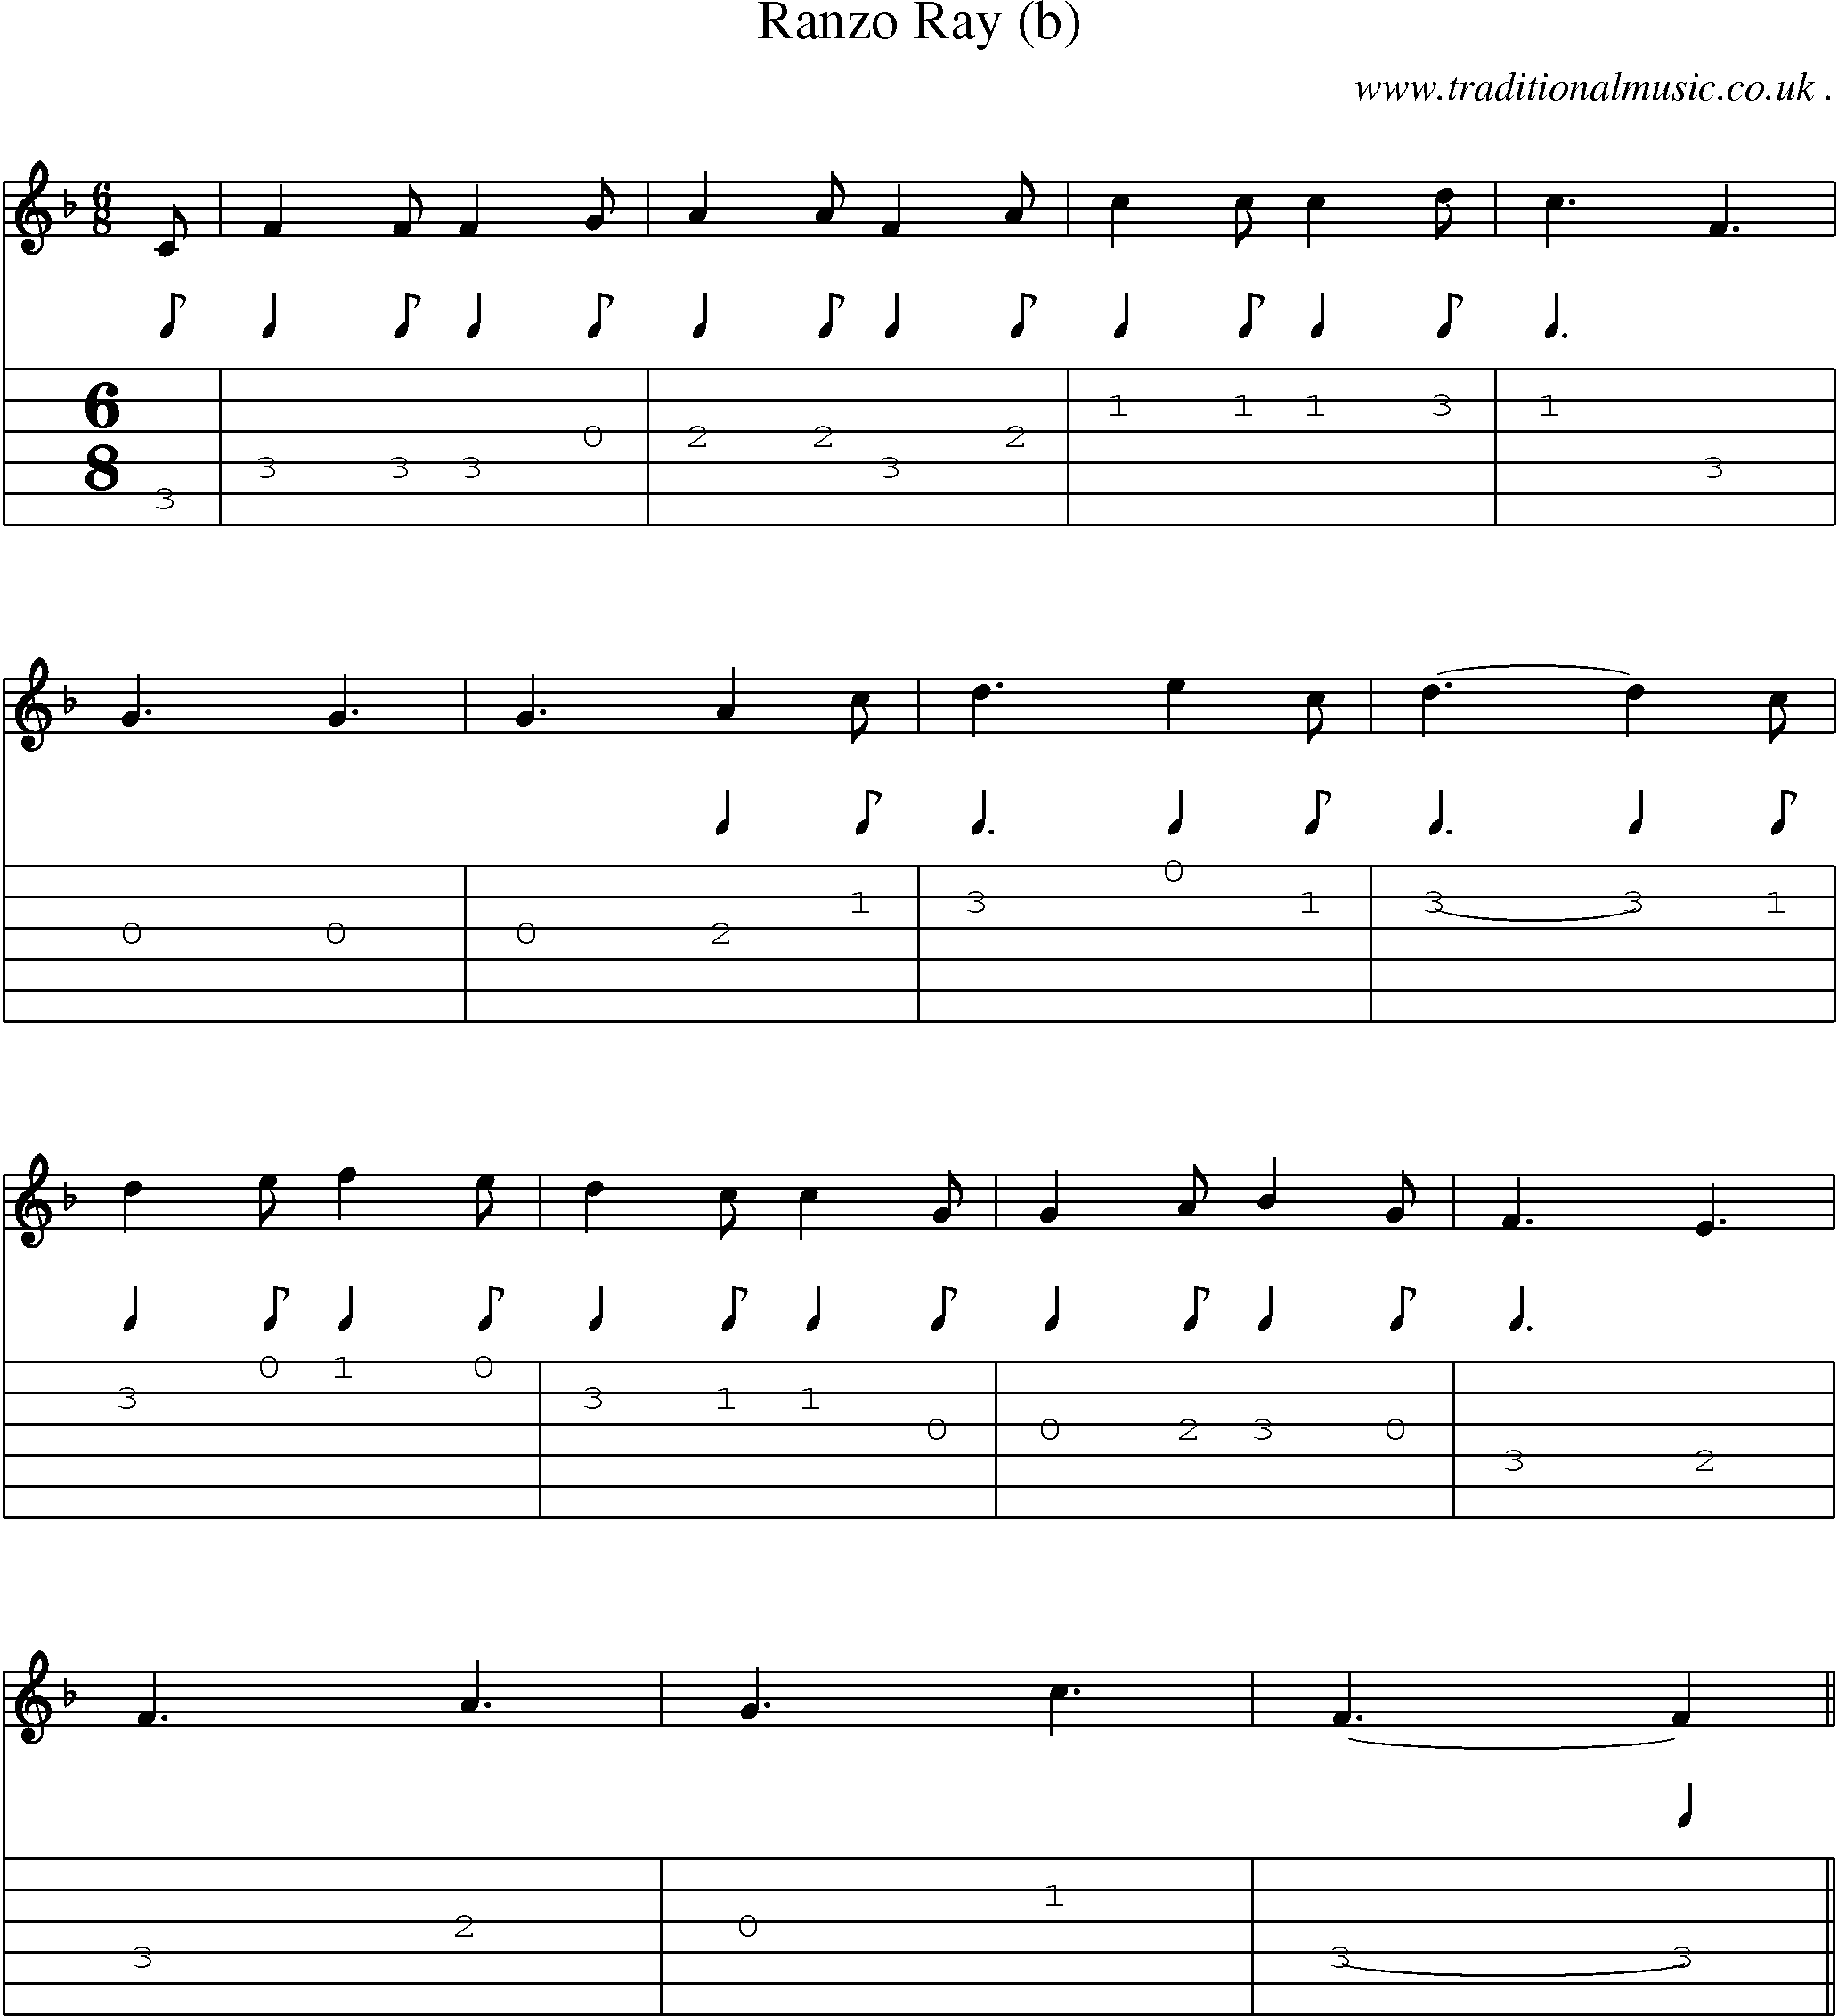 Sheet-Music and Guitar Tabs for Ranzo Ray (b)